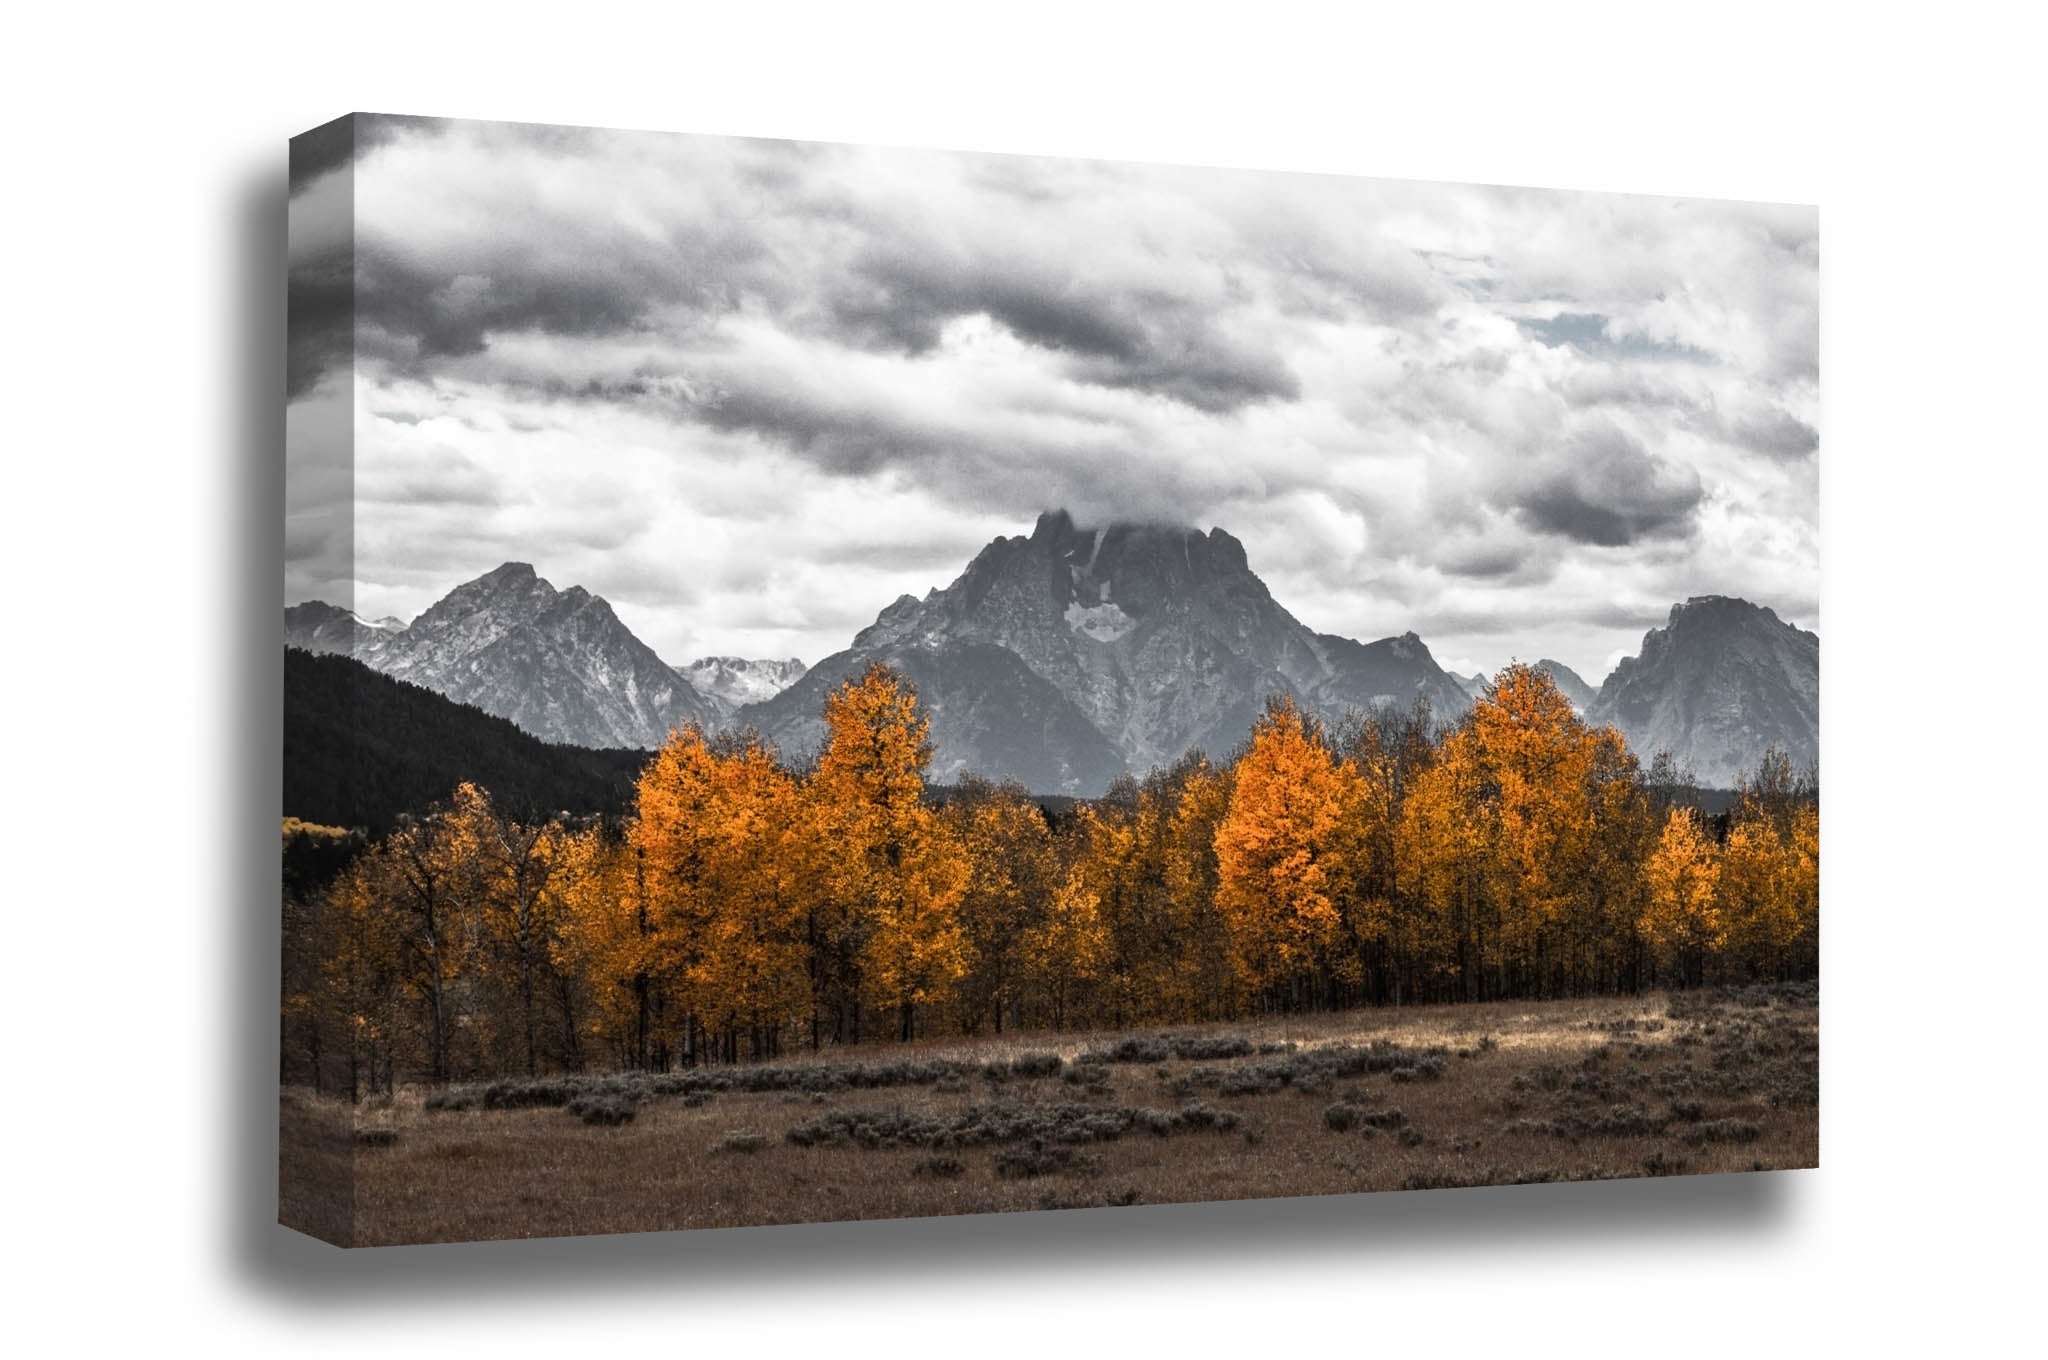 Rocky Mountain canvas wall art of Mount Moran overlooking golden aspen trees on an autumn day in Grand Teton National Park, Wyoming by Sean Ramsey of Southern Plains Photography.